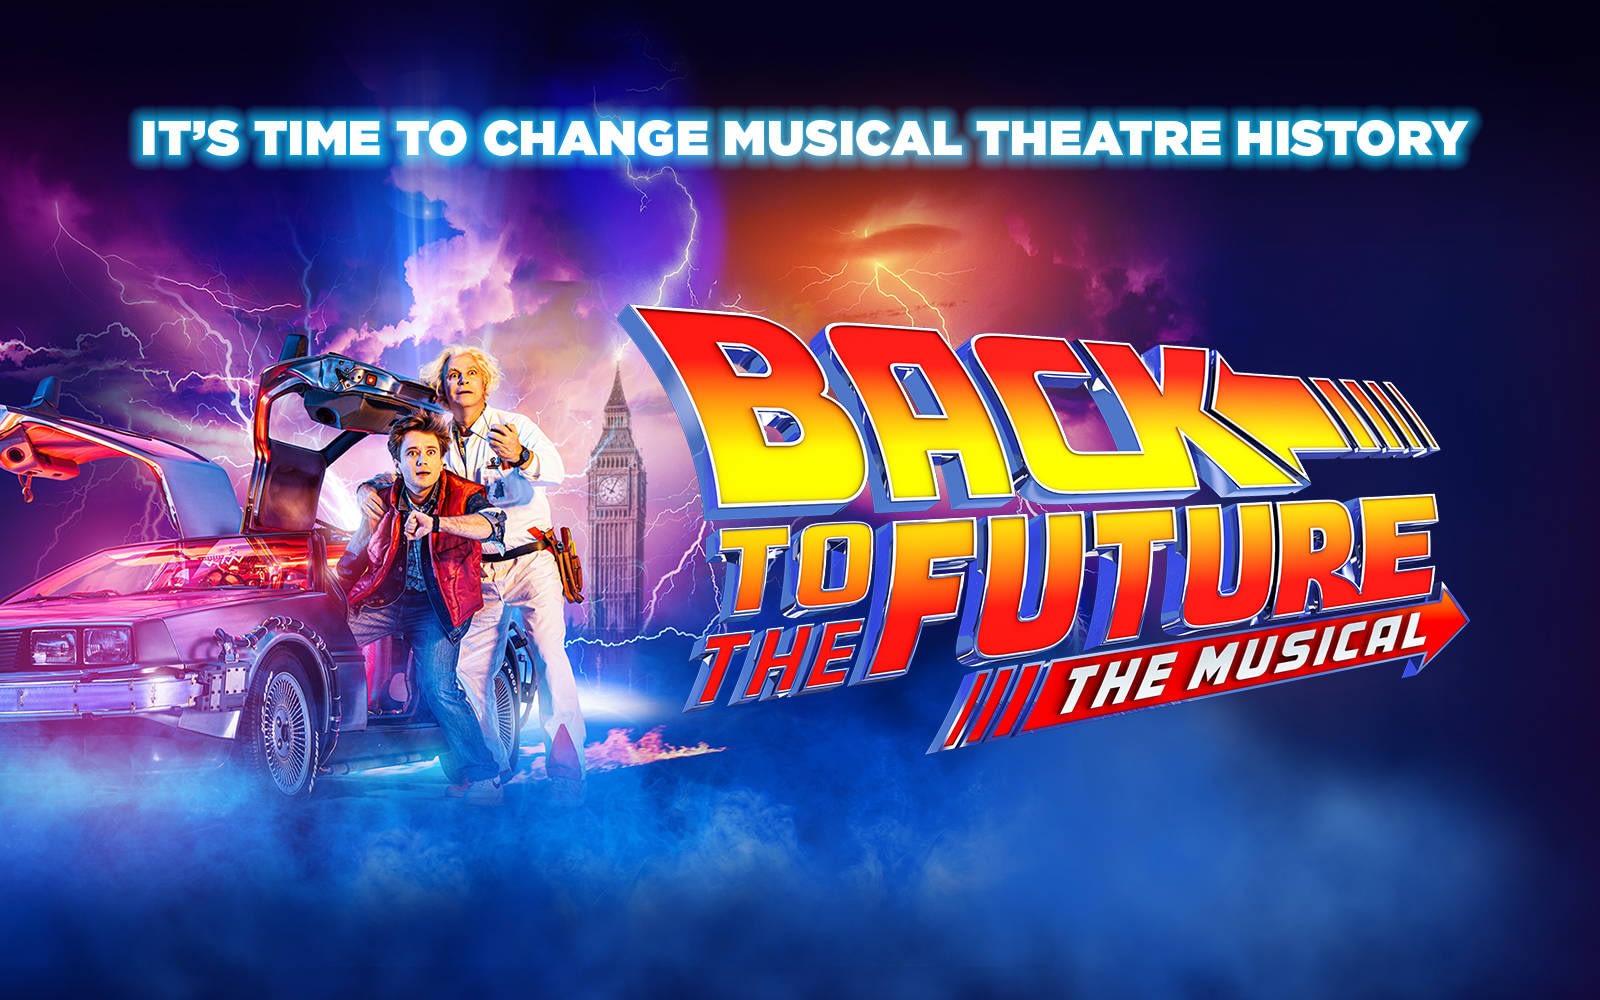 Back to the Future the Musical begins performances 20 August at the